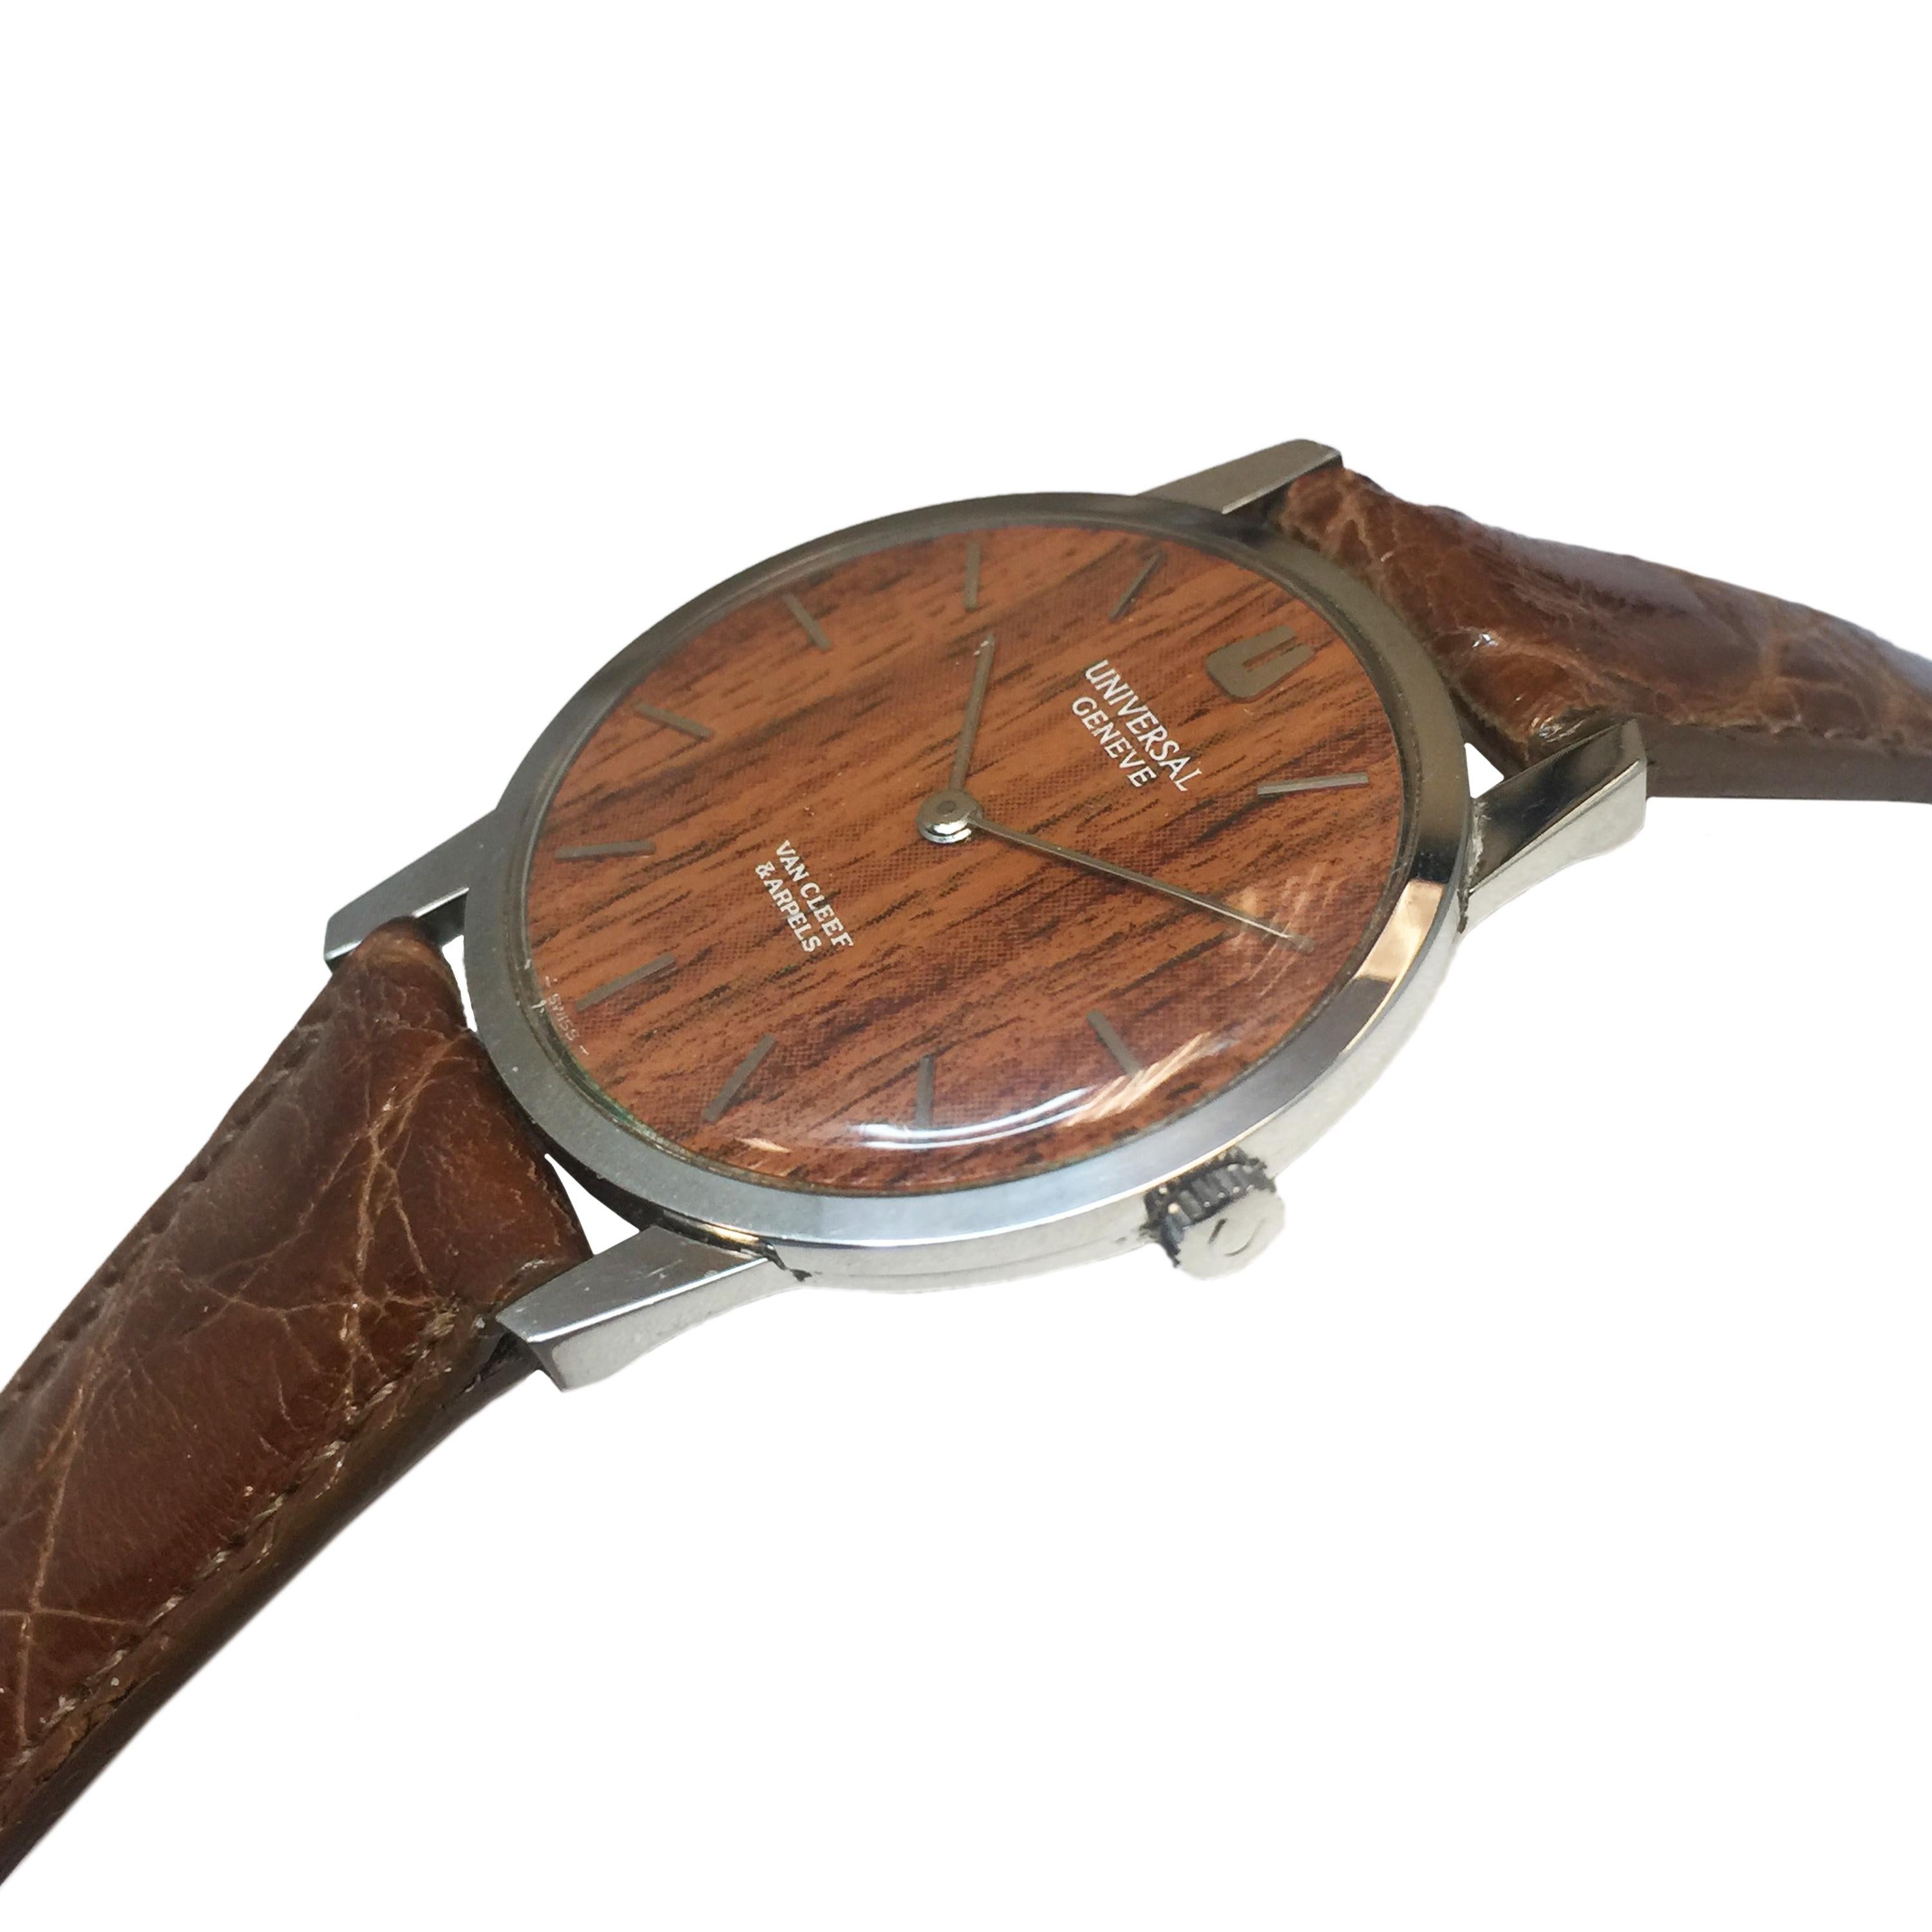 Circa 1970s Universal Geneve Retailed by Van Cleef & Arpels Rare Wood Dial Wrist Watch, 31 MM Diameter 3 piece Stainless Steel Case, 6 MM thick. 17 Jewel Mechanical, manual wind movement.   Fitted with a Wood Dial and having raised Markers. Hadley